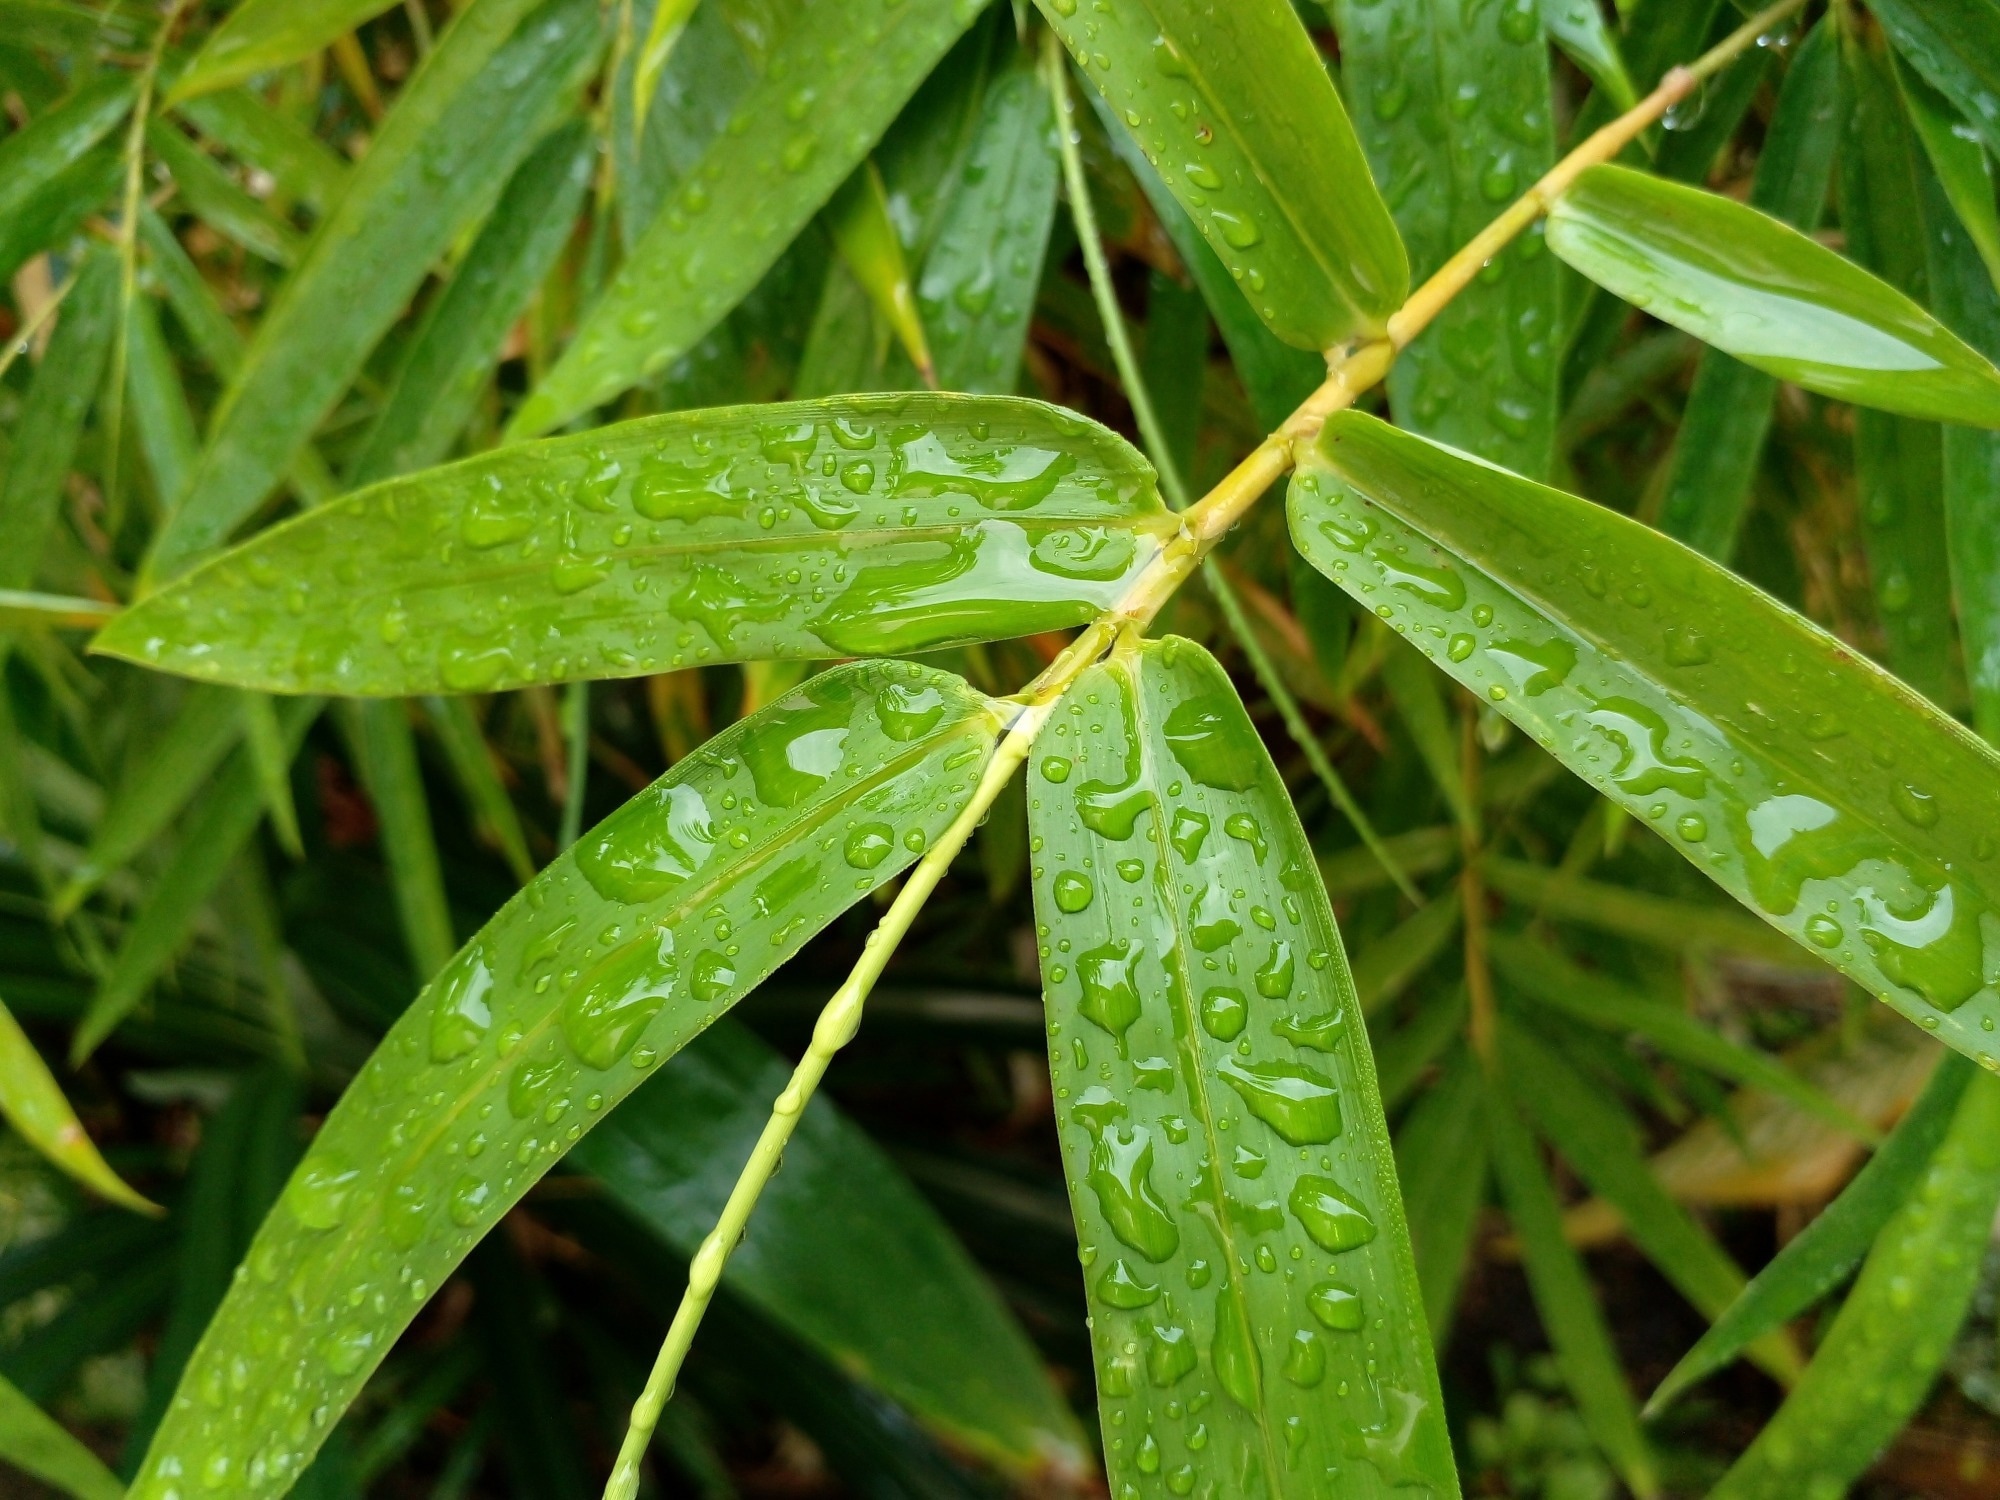 Study: Anti-Inflammatory and Antioxidant Effects of Leaves and Sheath from Bamboo (Phyllostacys edulis J. Houz). Image Credit: ListyDwi/Shutterstock.com